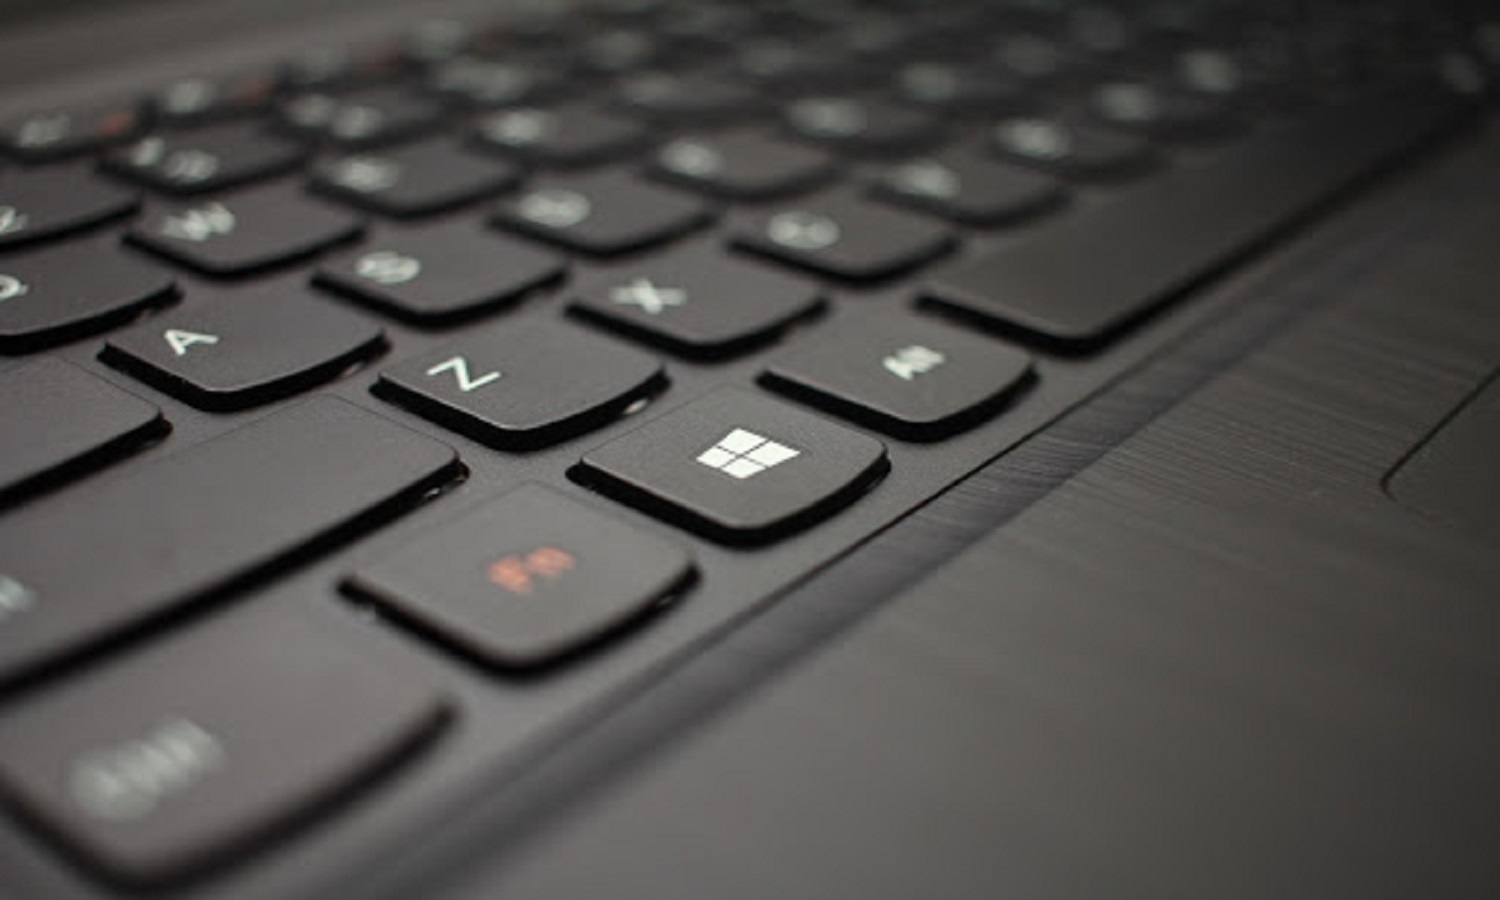 How to Enable Laptop keyboard Windows 10 After Disabling It